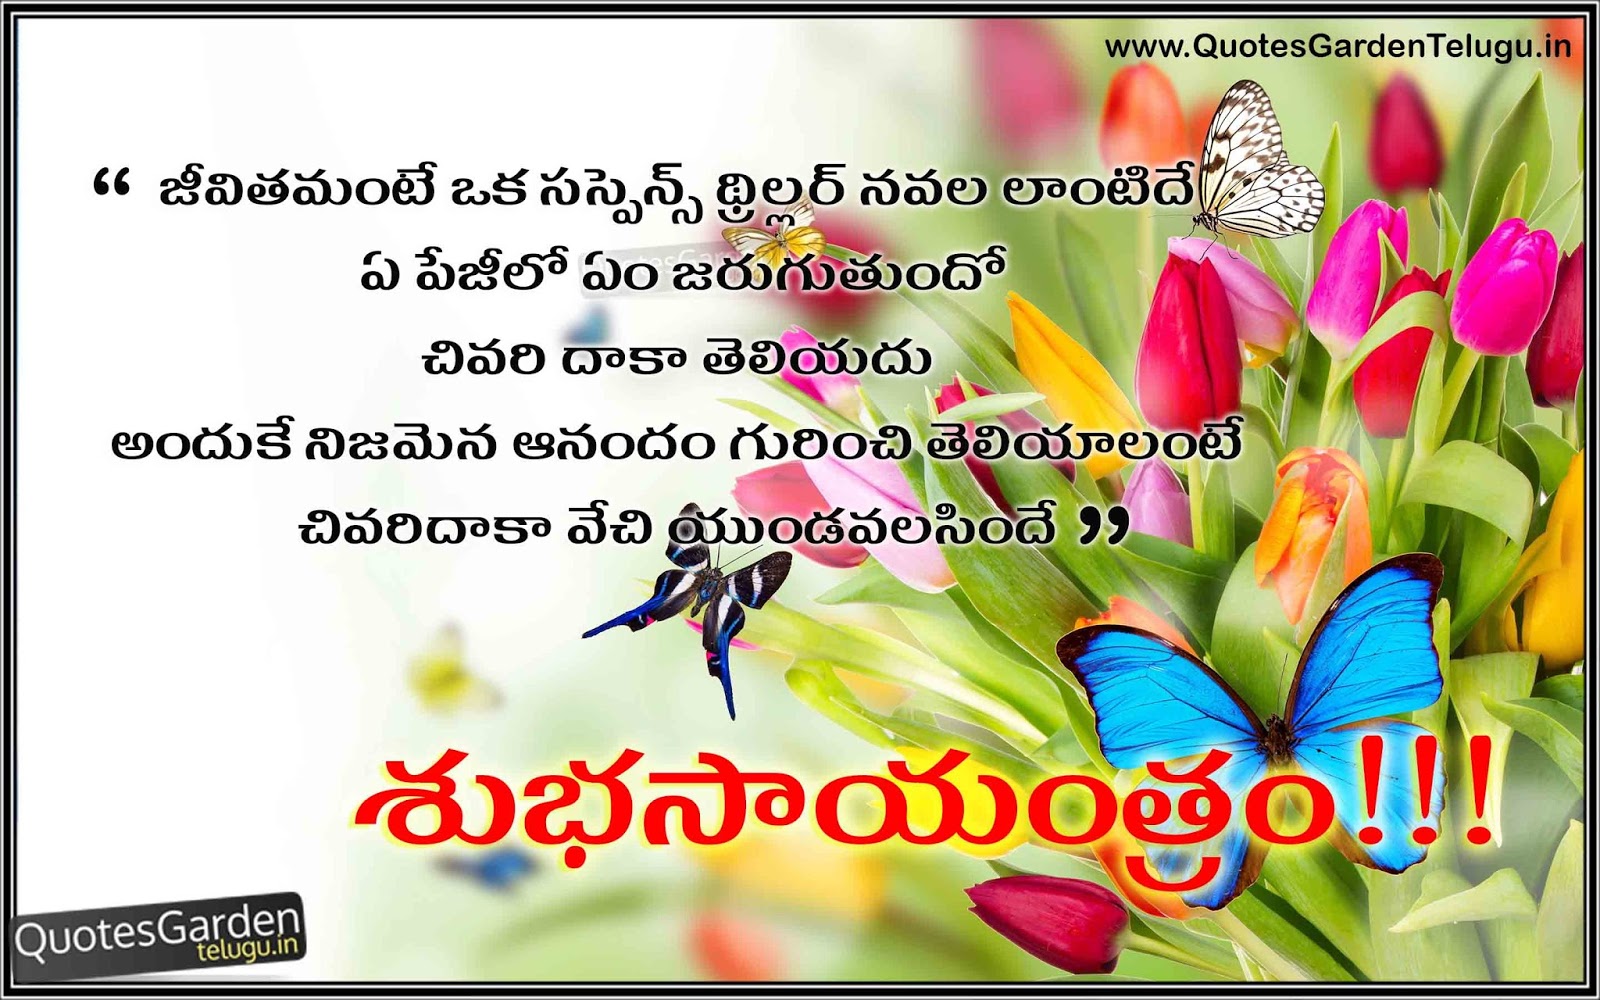 Best Thoughts n telugu Good evening quotes for friends | QUOTES ...